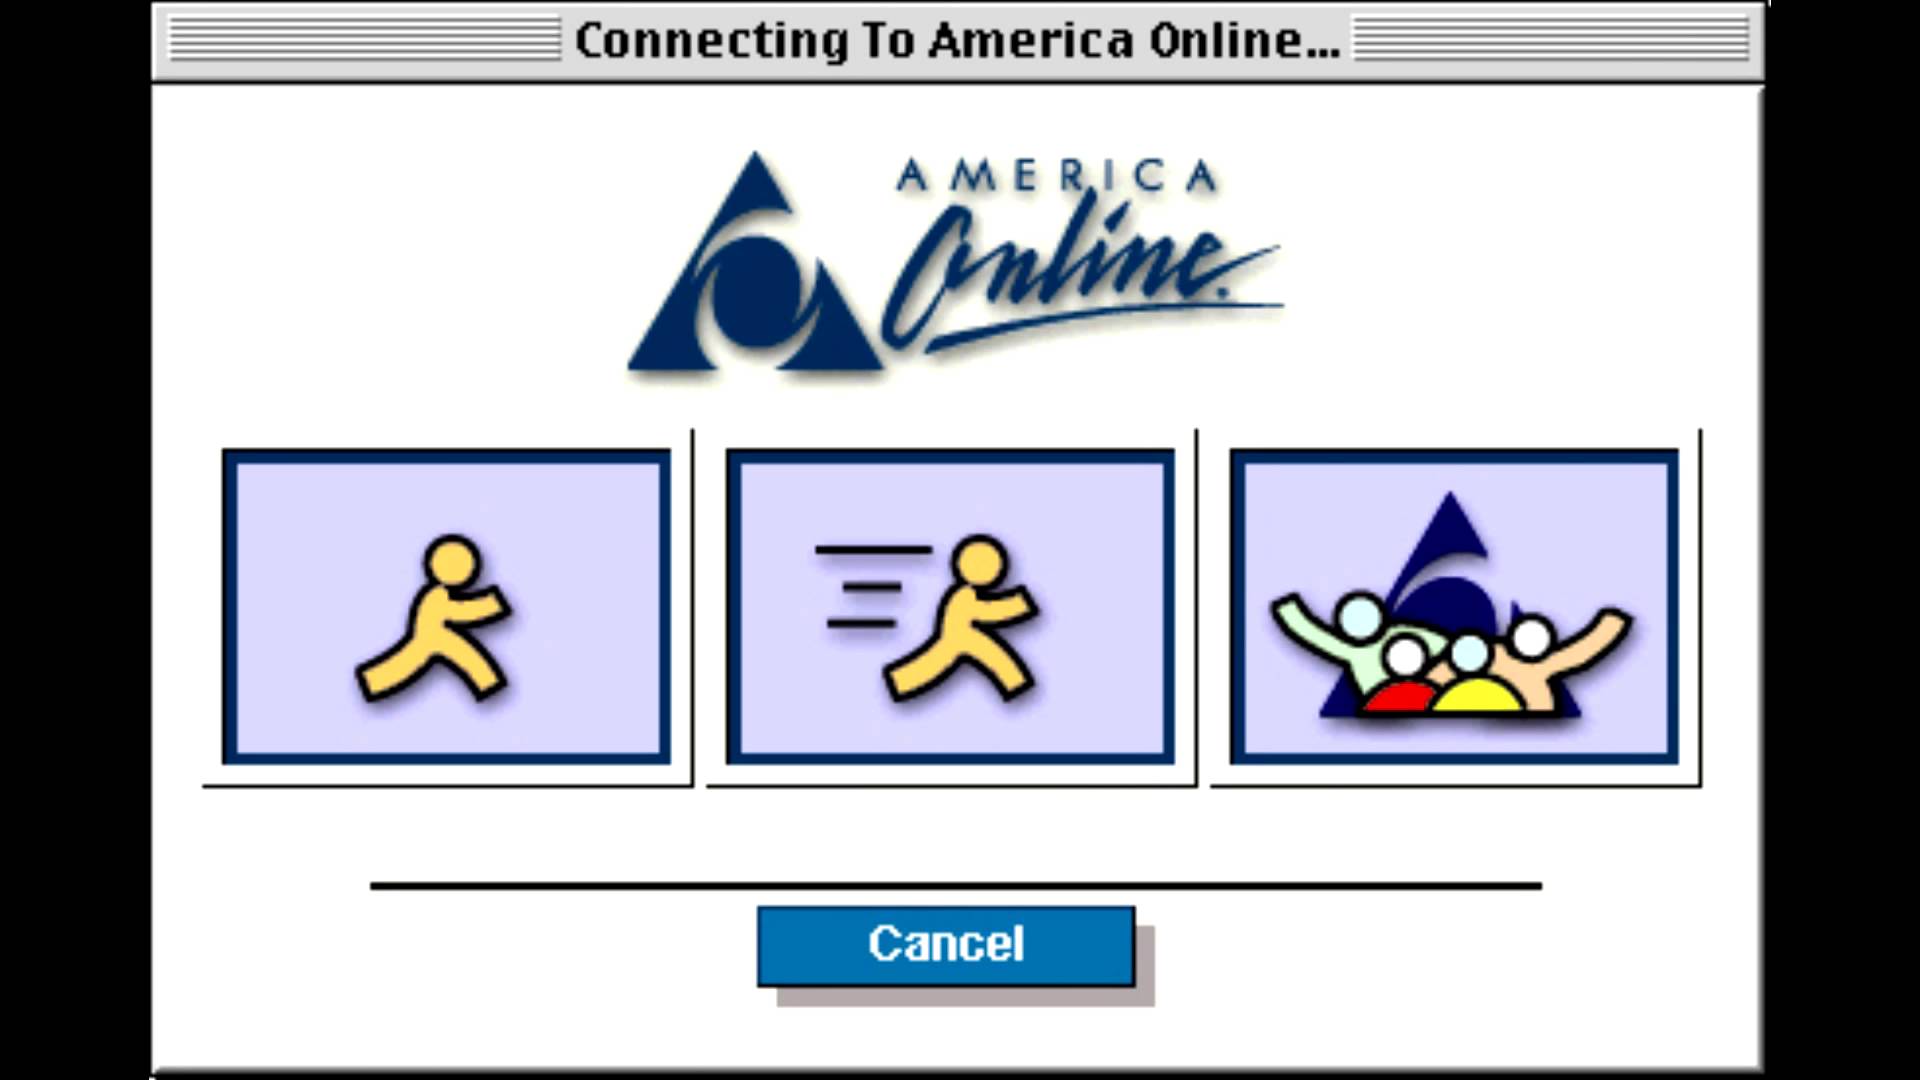 Remember dial-up Internet? It stopped being a popular way of connecting to the Internet over 15 years ago.